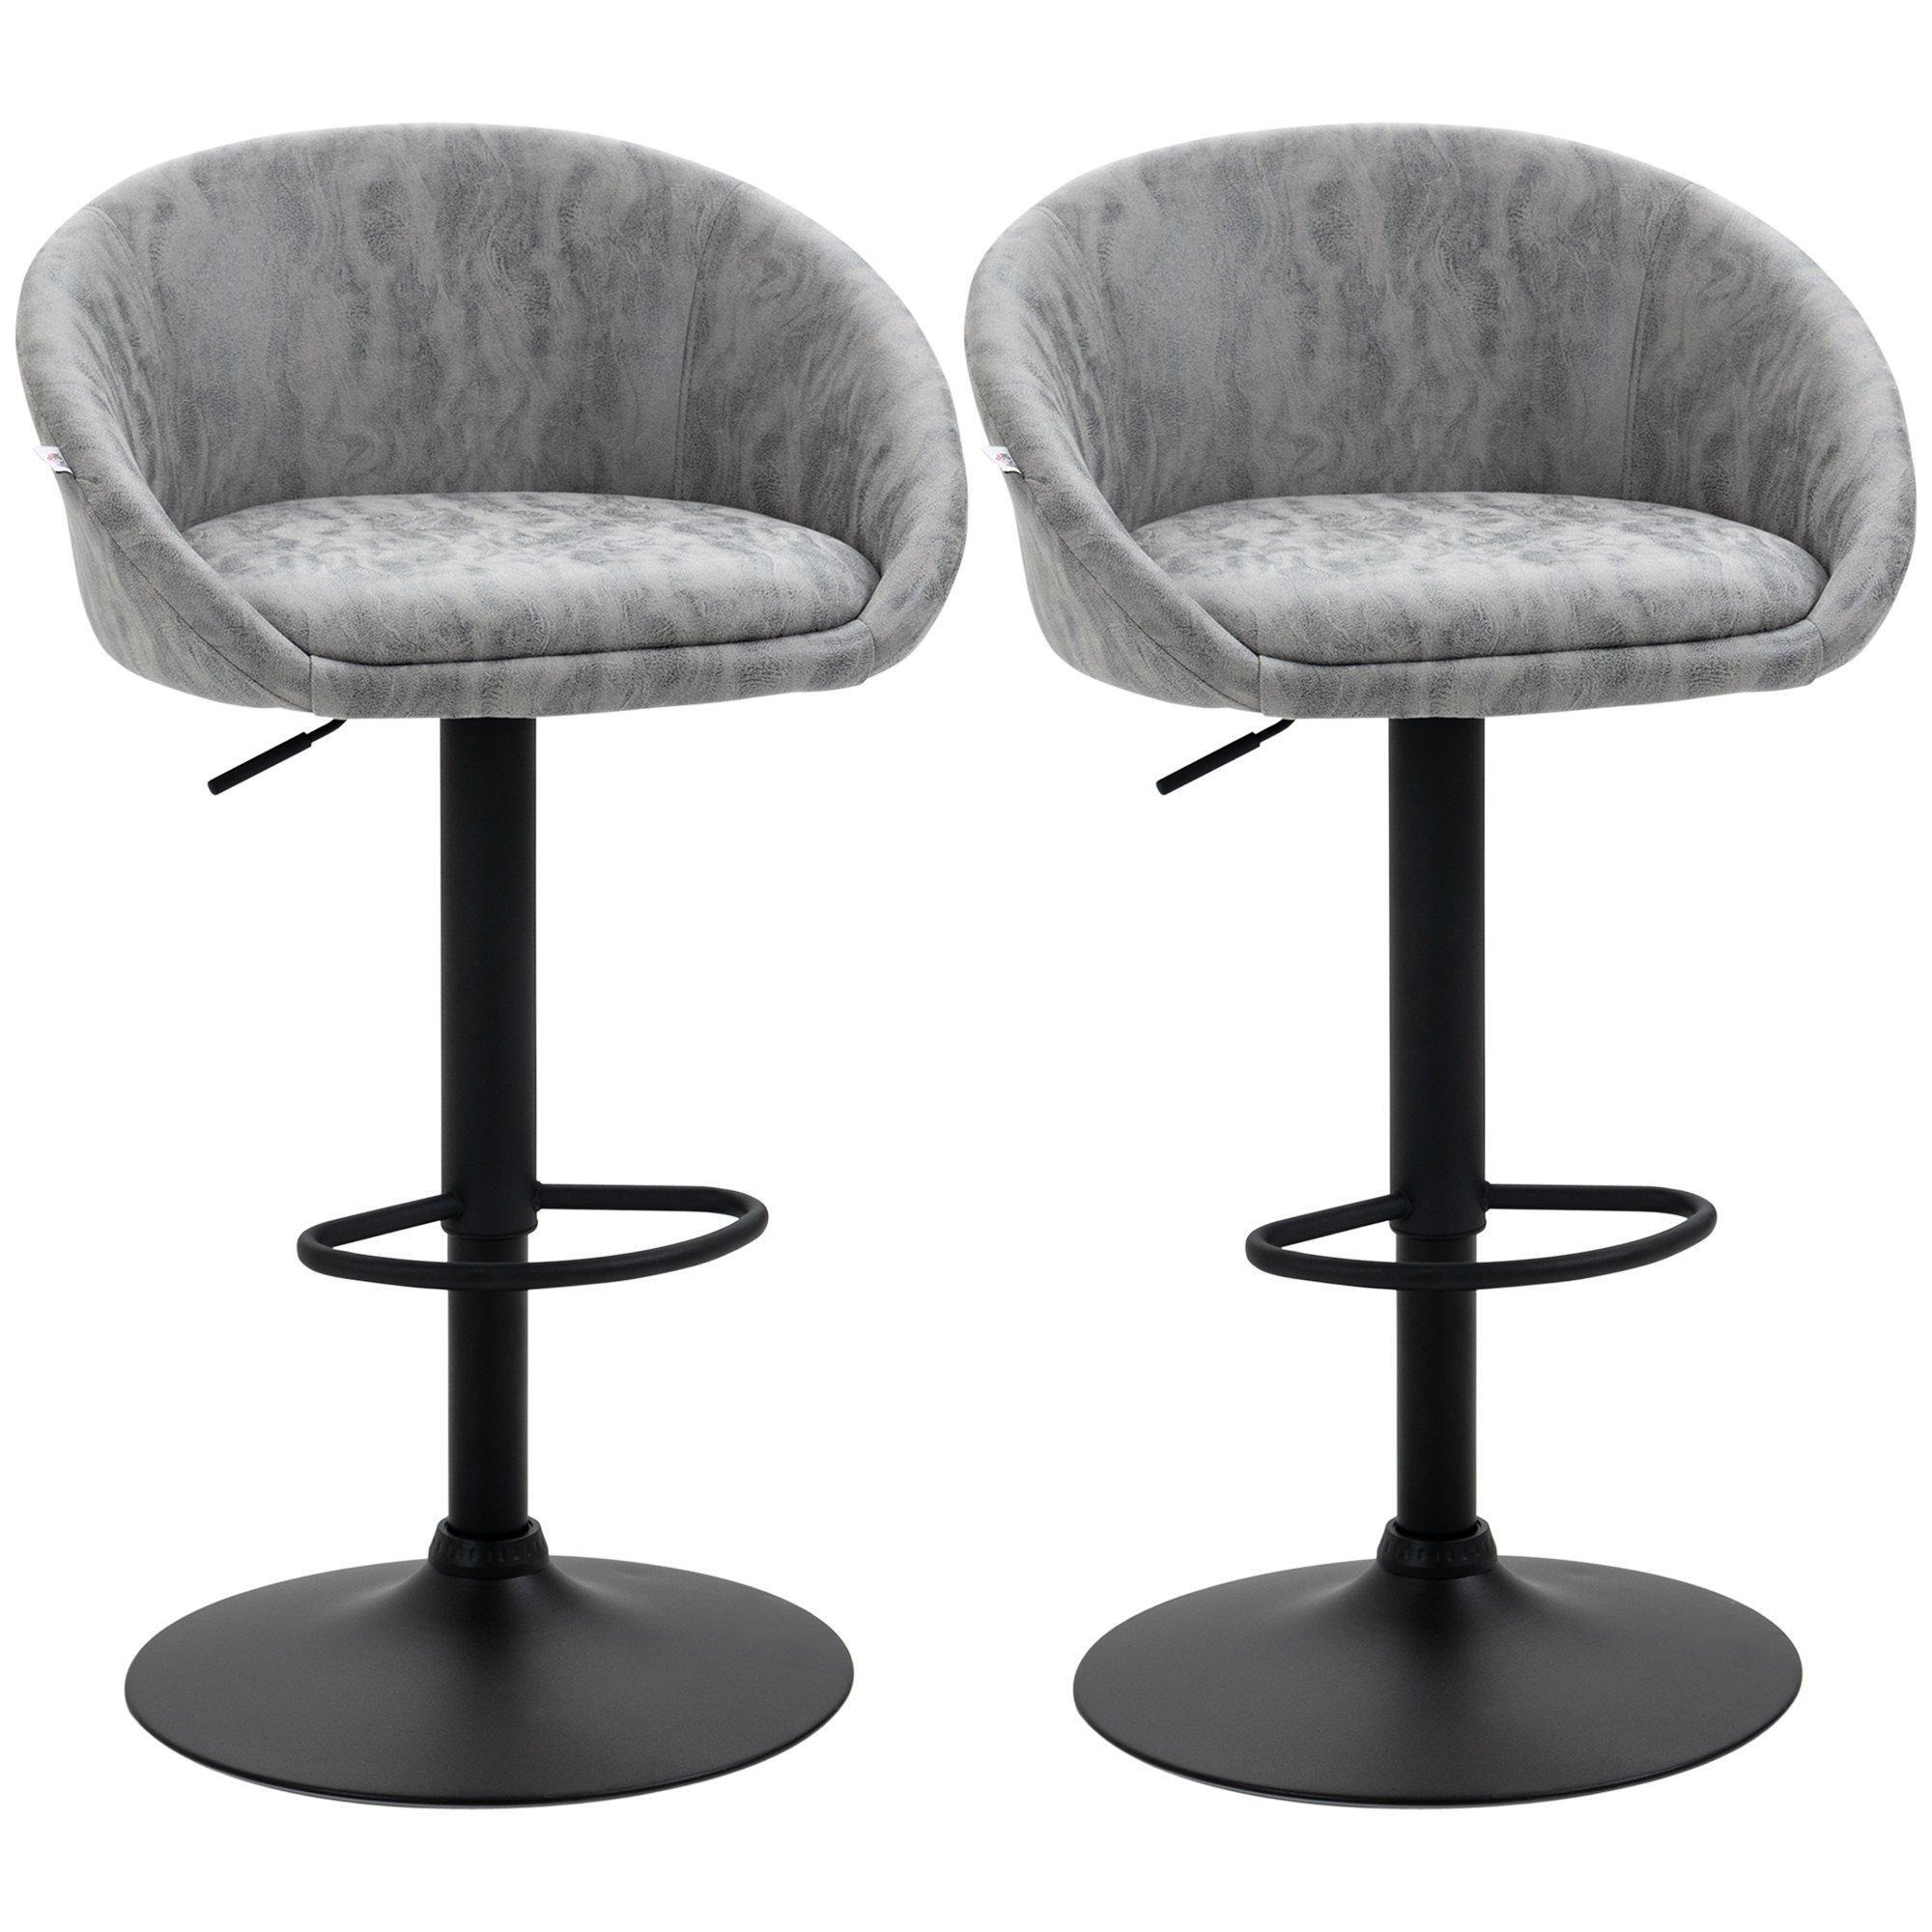 Adjustable Swivel Bar Stools Set of 2 Bar Chairs with Footrest - image 1